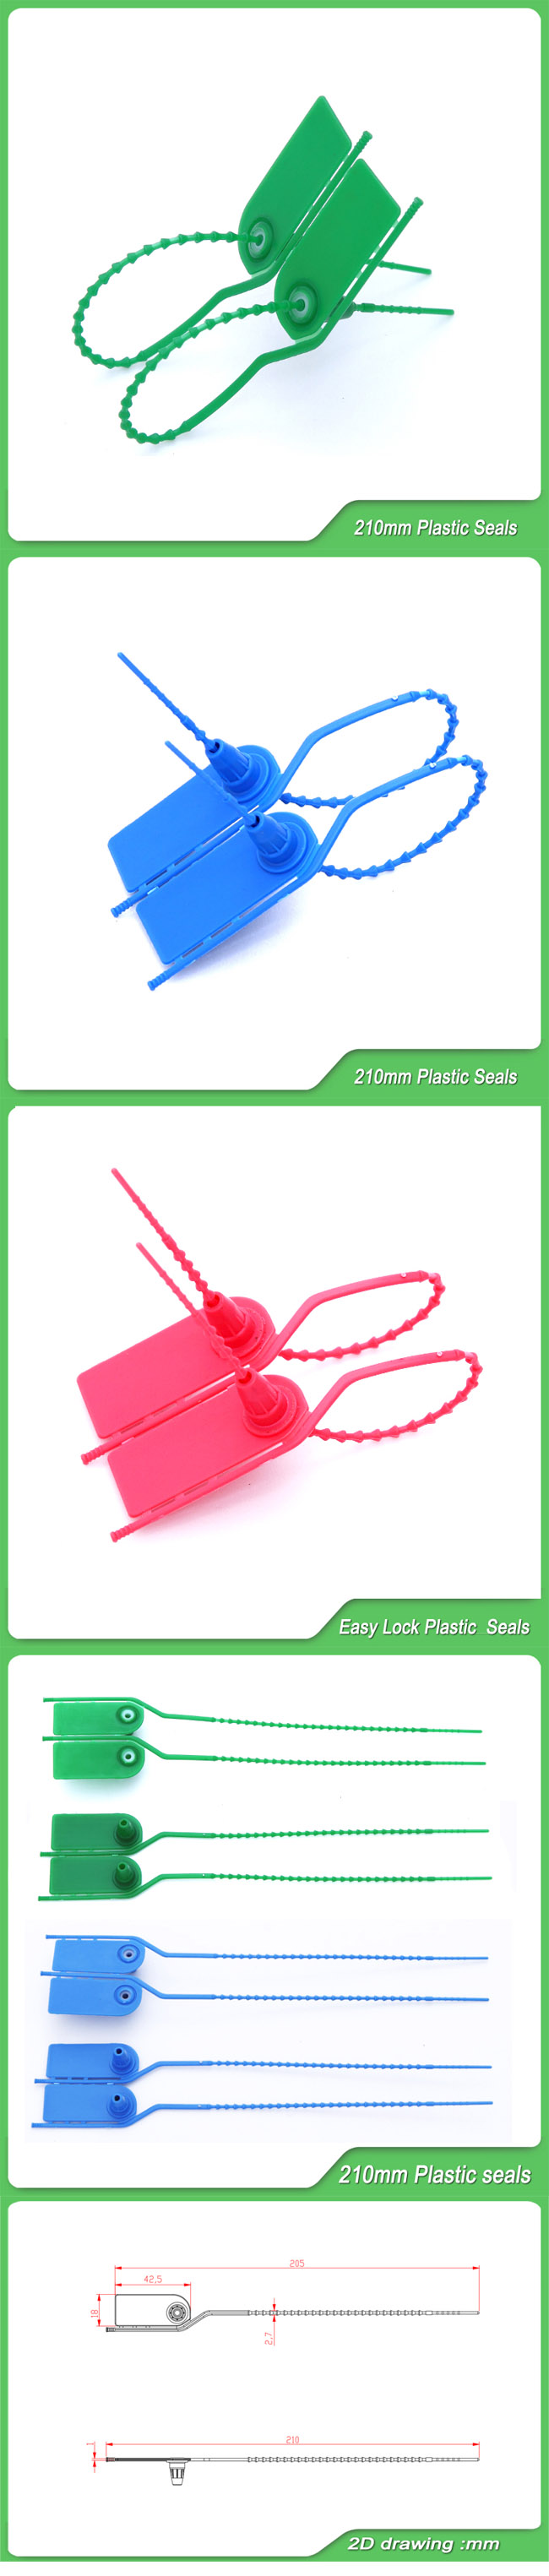 Safety Plastic Seal (JY210T)